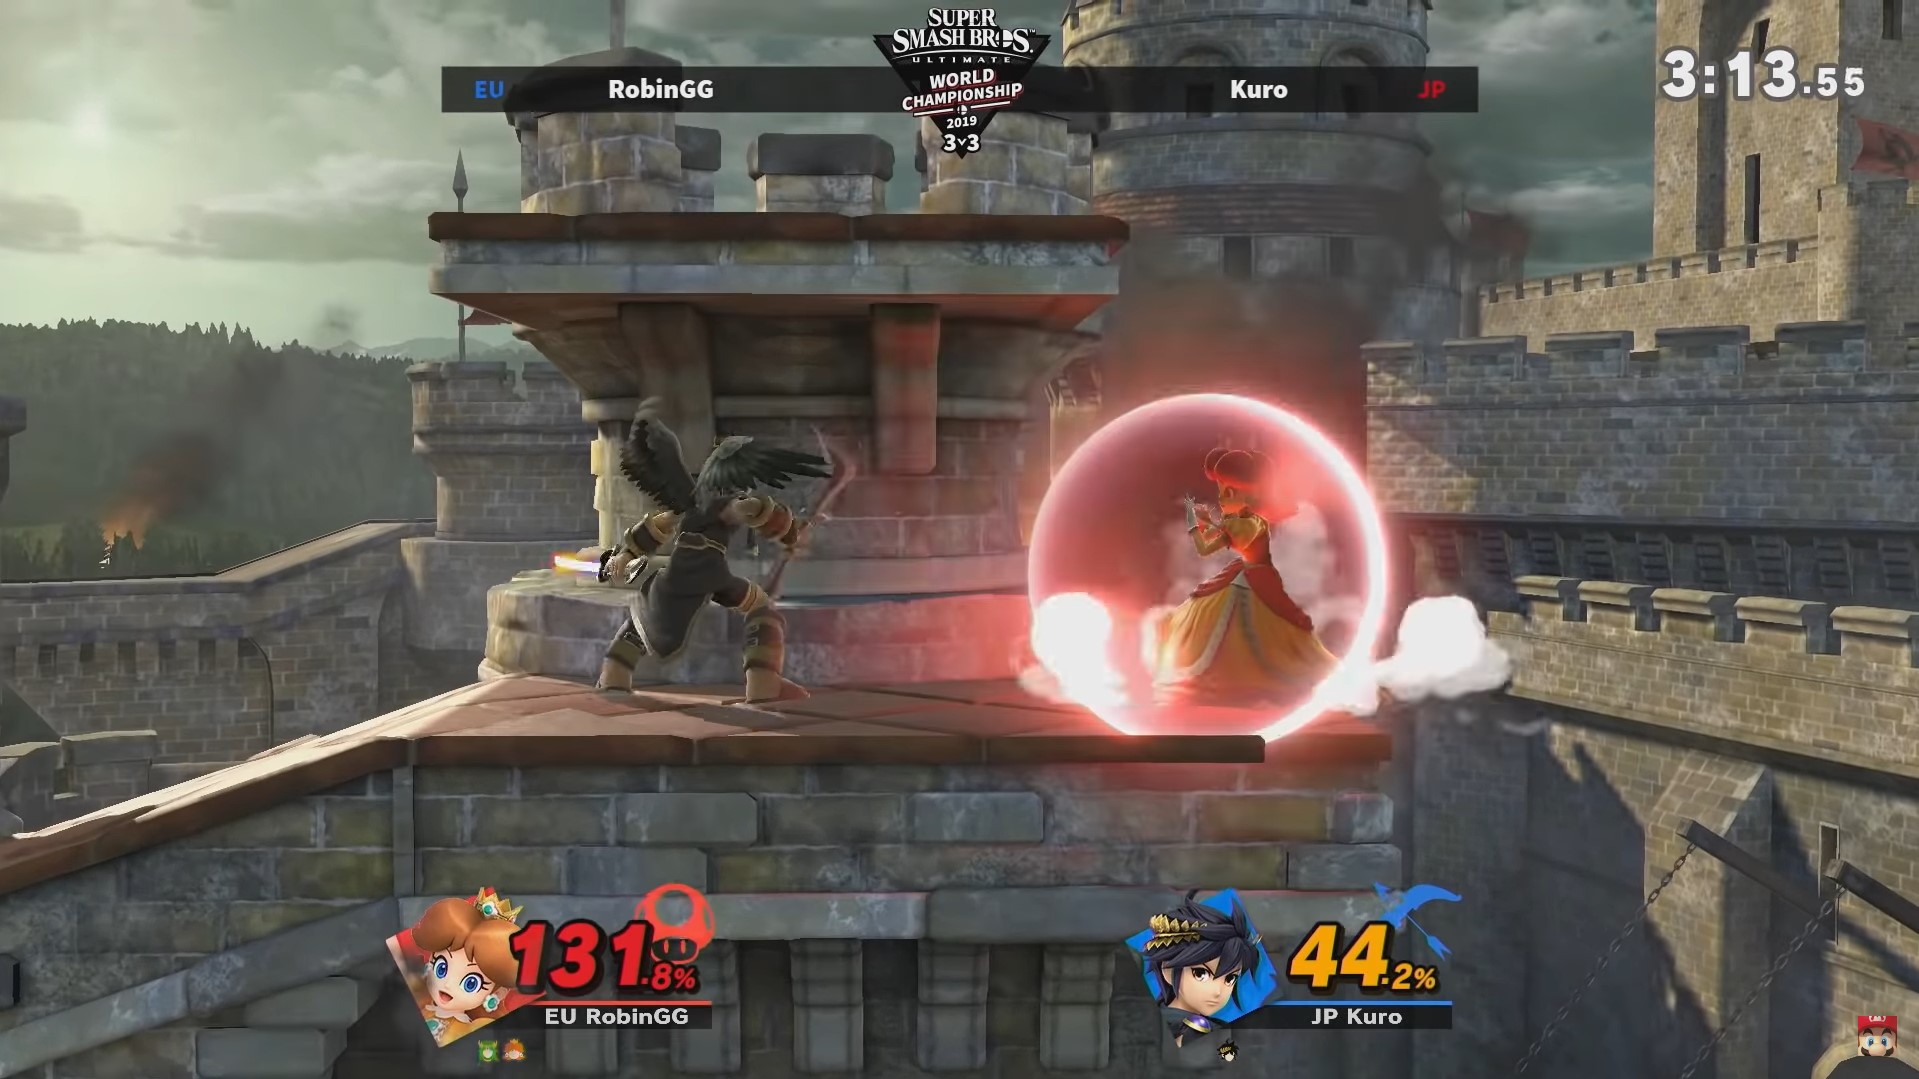 Super Smash Brothers fighting